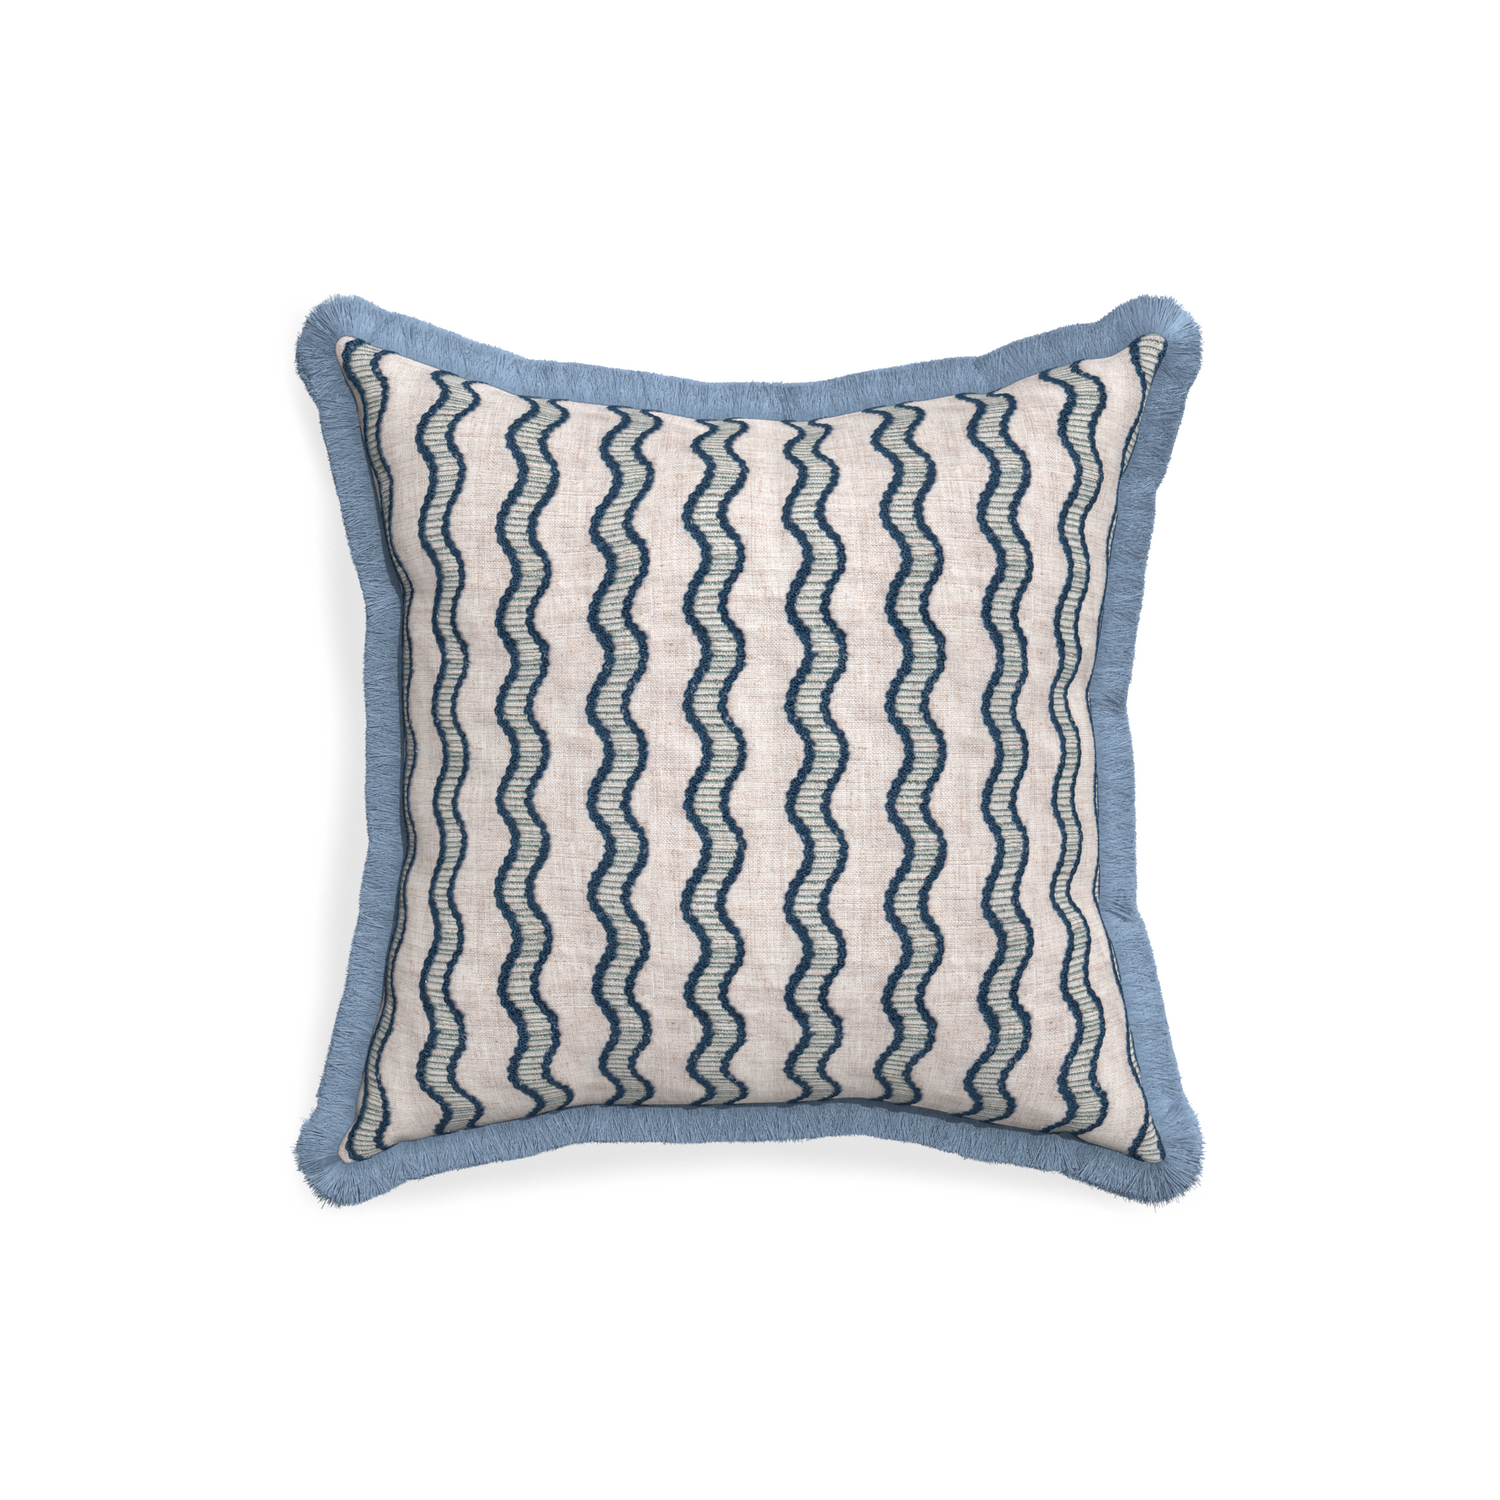 18-square beatrice custom embroidered wavepillow with sky fringe on white background